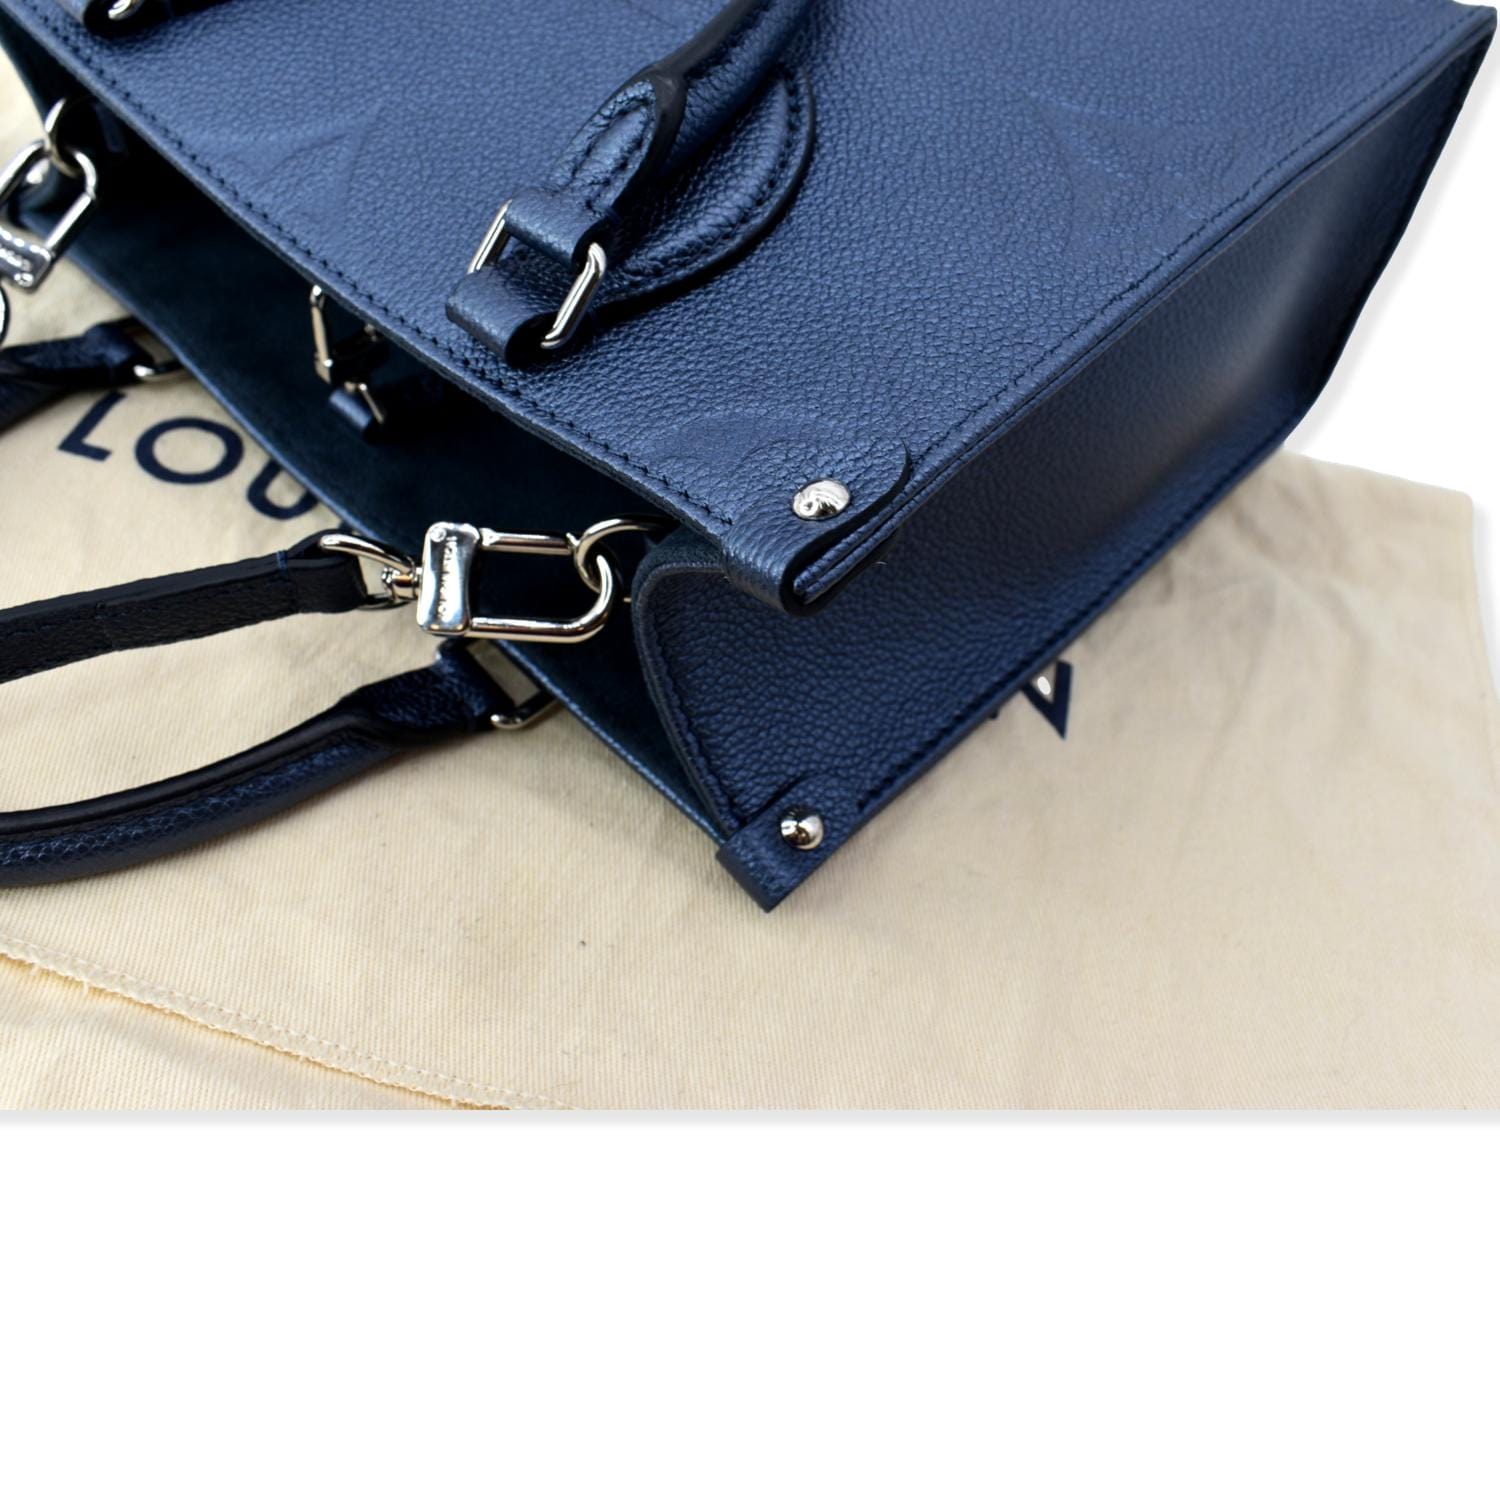 Louis Vuitton OnTheGo PM Blue - Branded Line